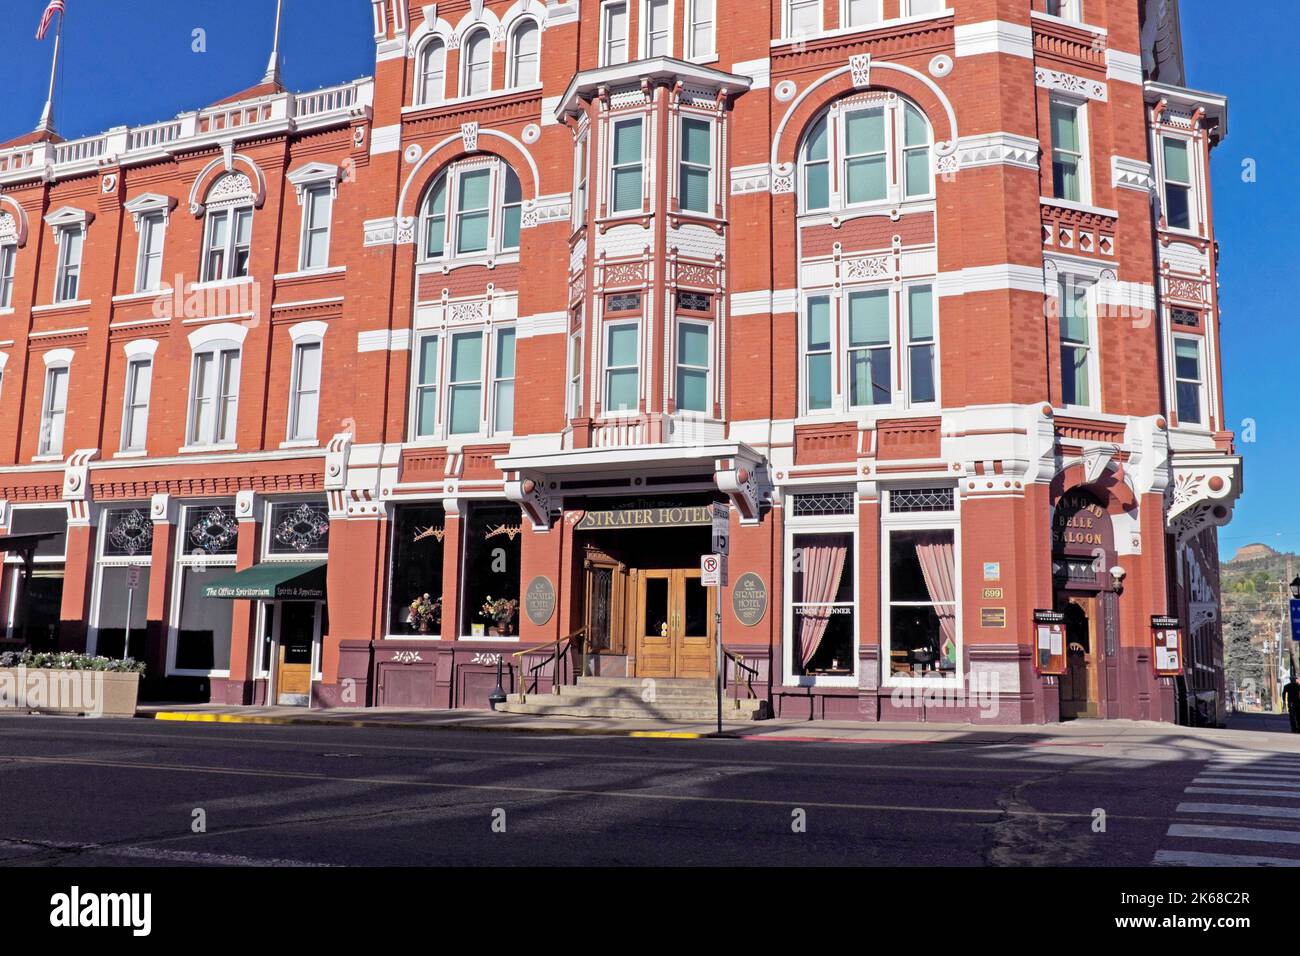 The landmark Strater Hotel, opened in 1887, main entrance on Main Avenue in the historic downtown district in Durango, Colorado, USA. Stock Photo